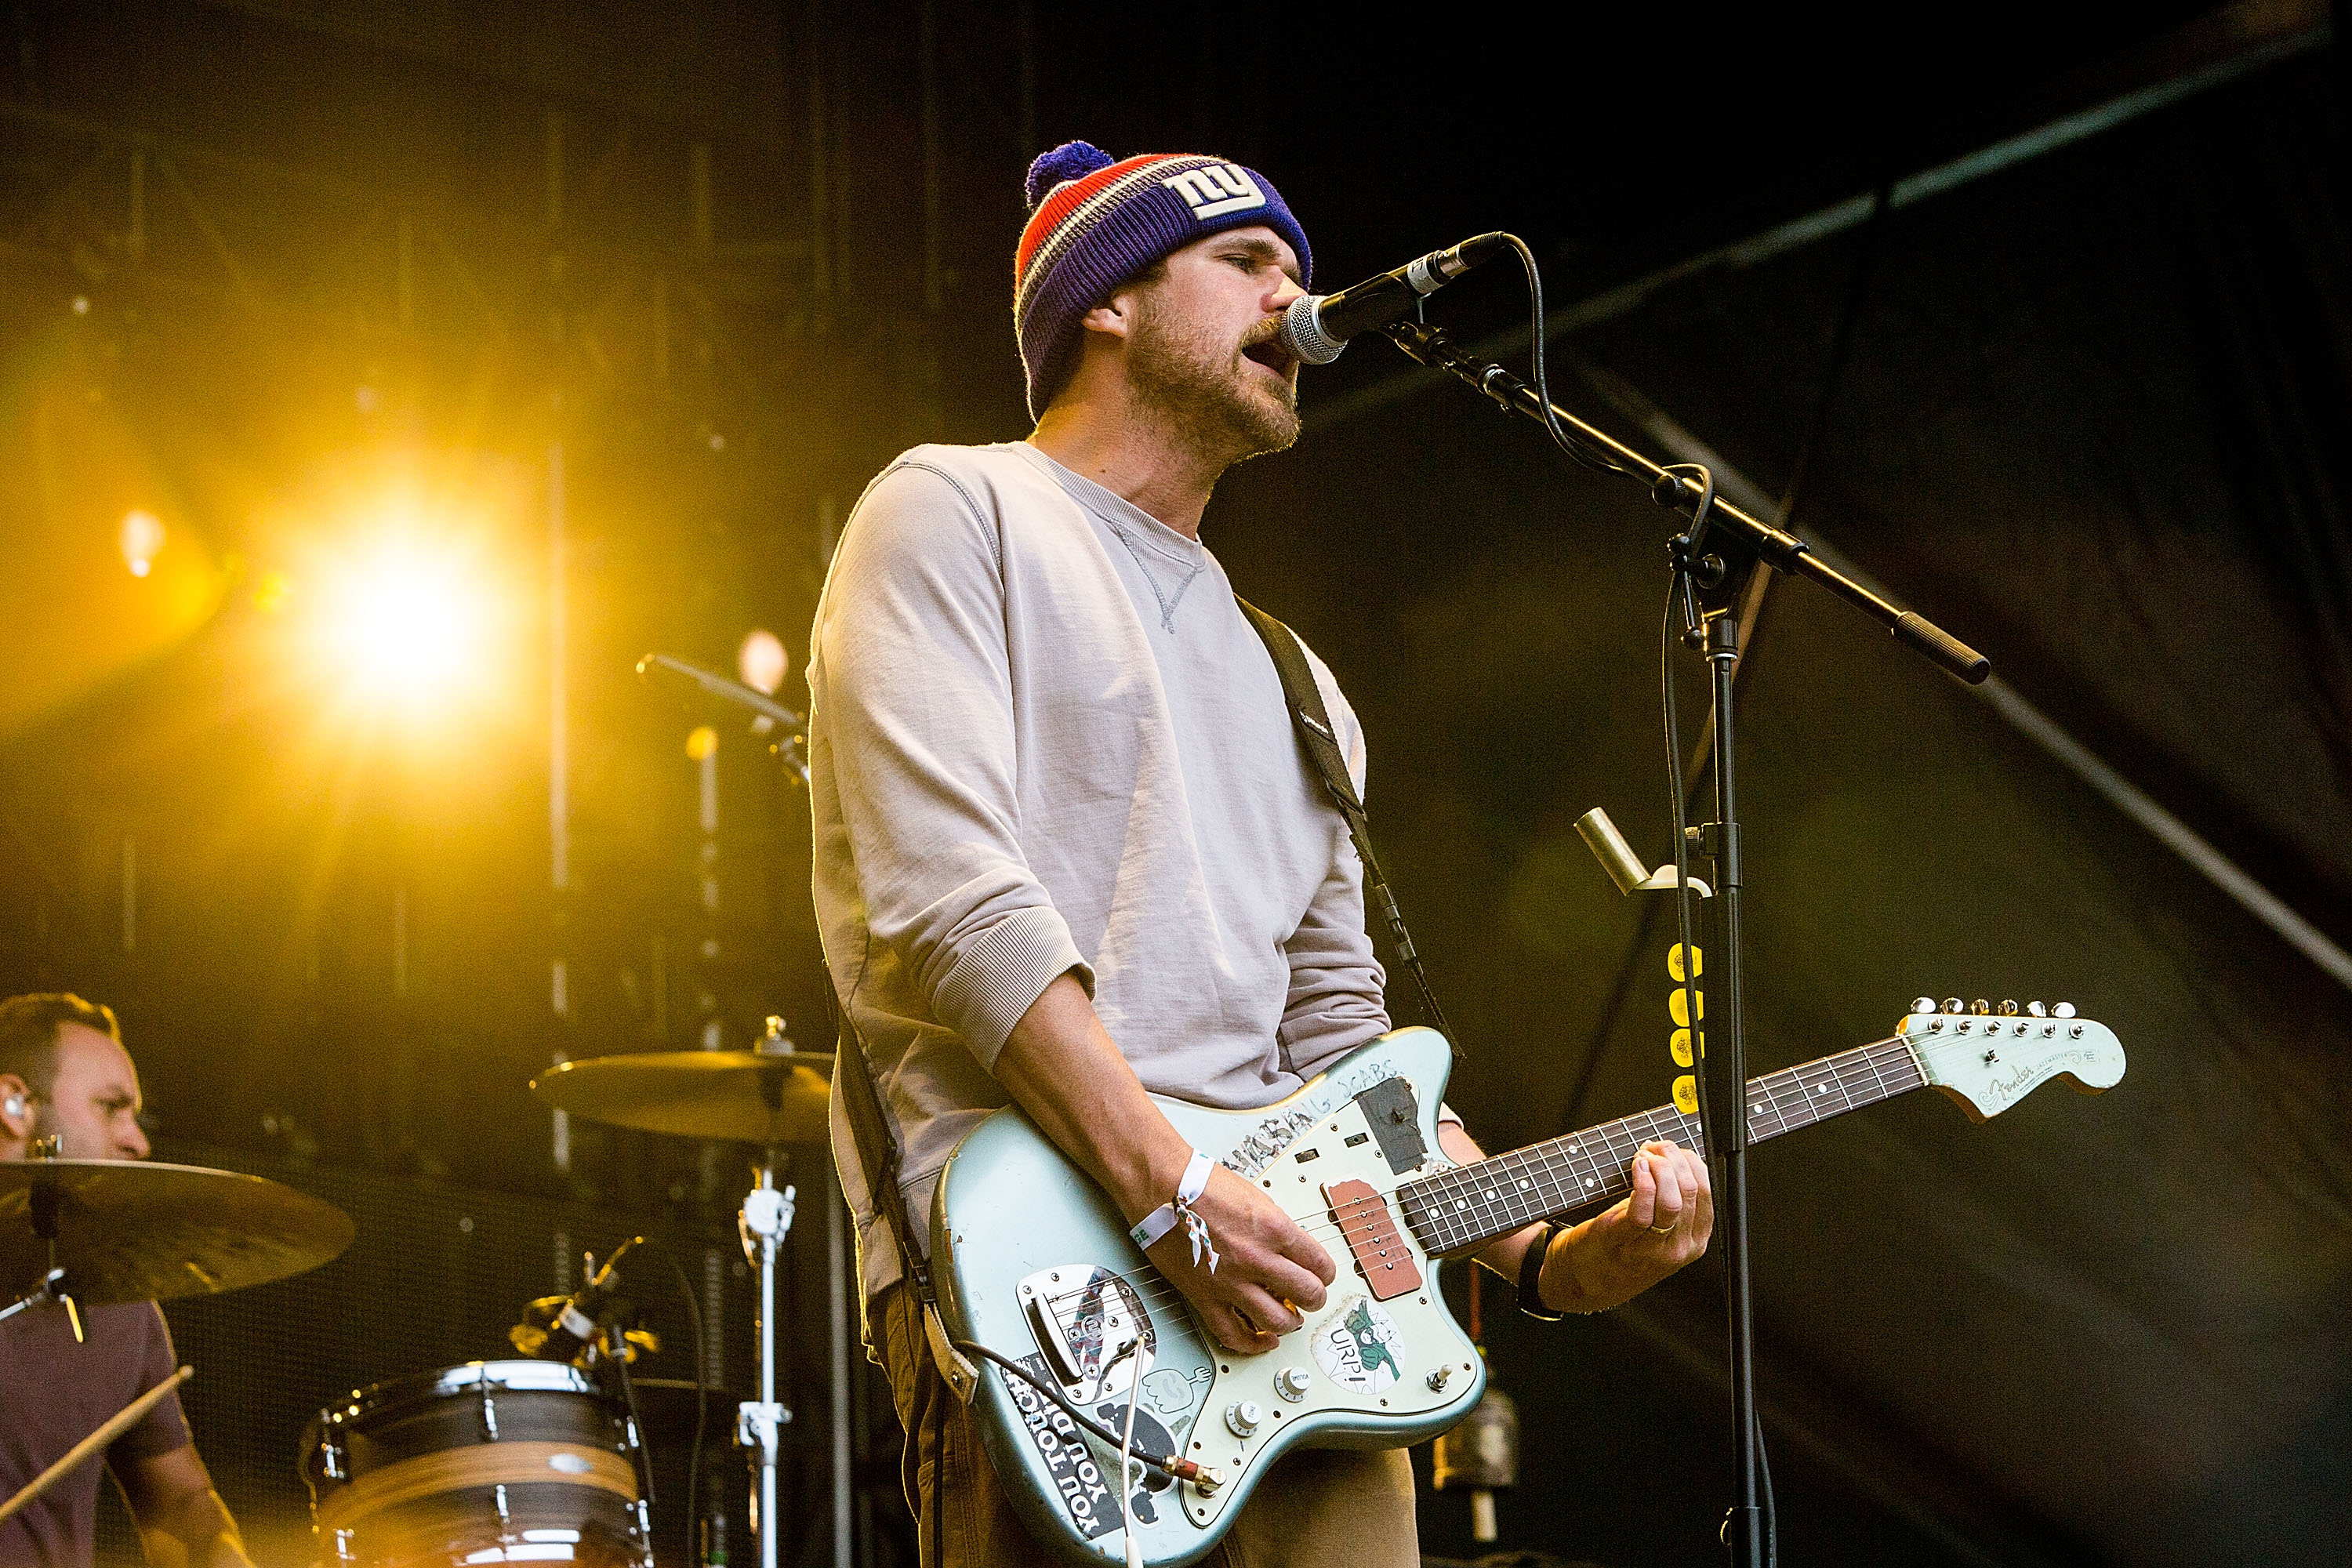 Jesse Lacey, Jesse Lacey tuning his guitar between songs